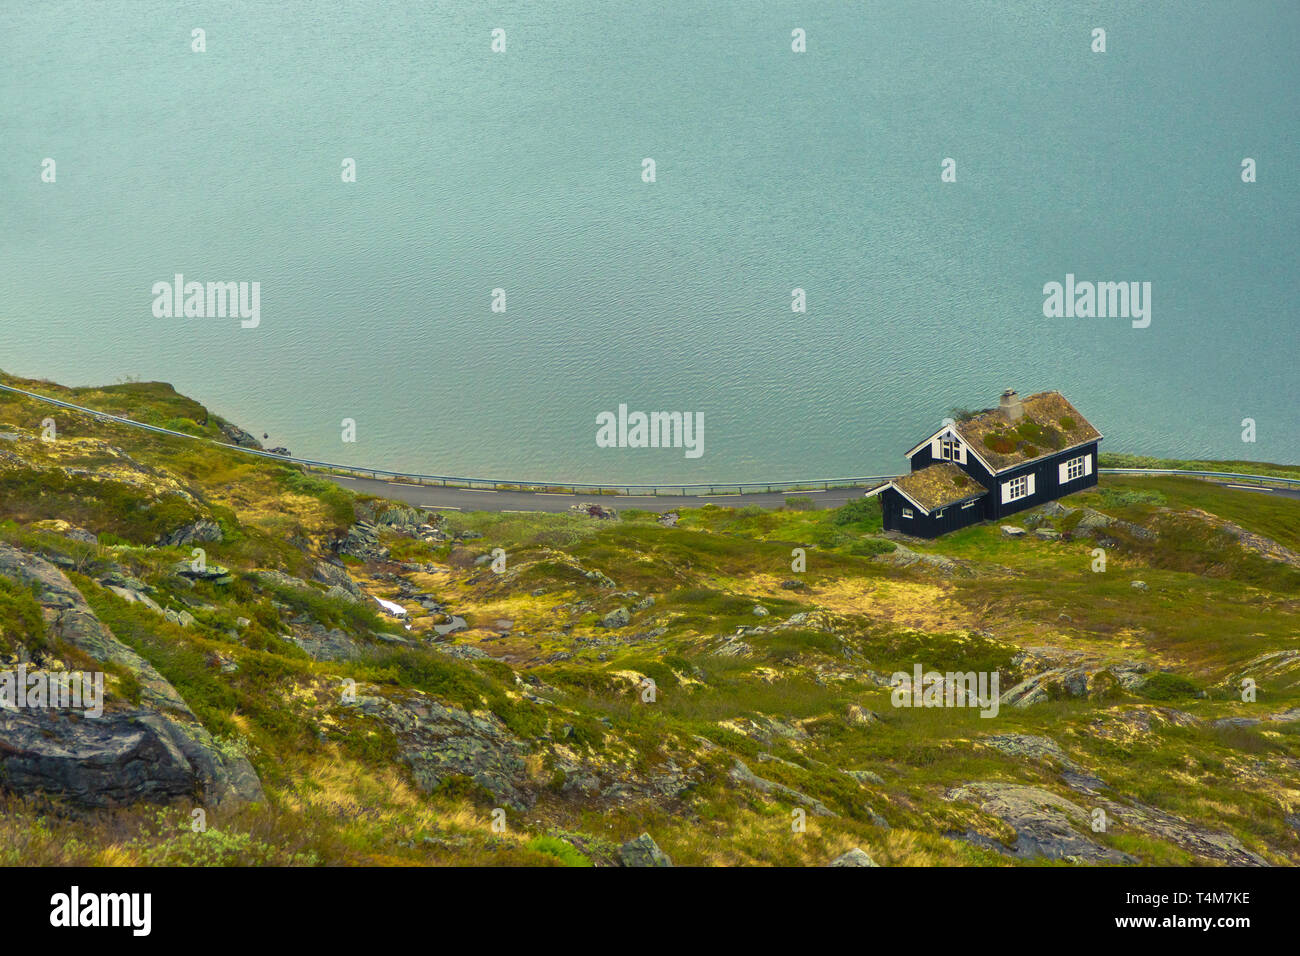 House with grass roofs in Norway Stock Photo